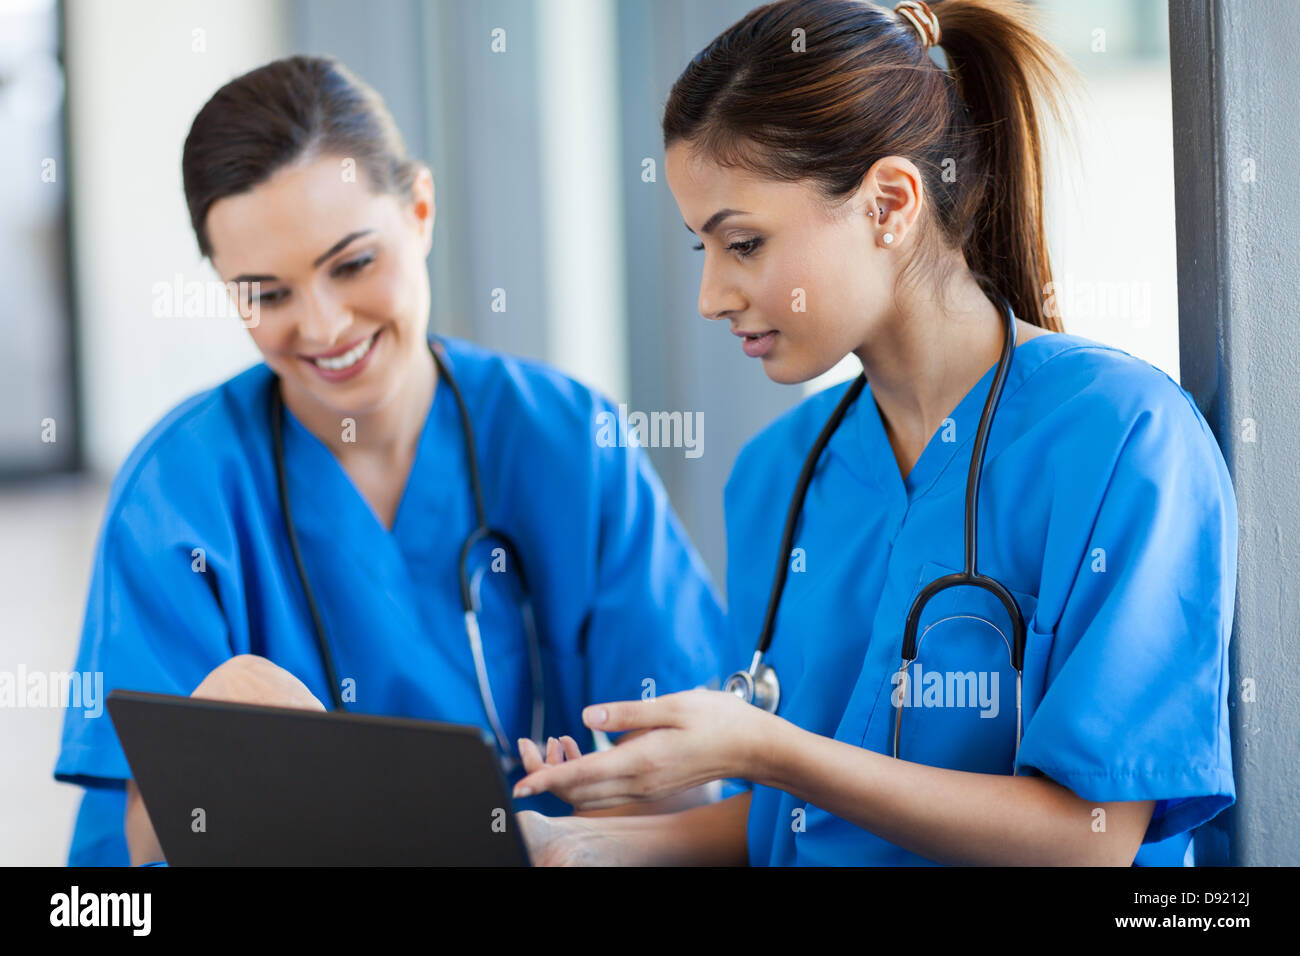 two beautiful female healthcare workers using laptop Stock Photo